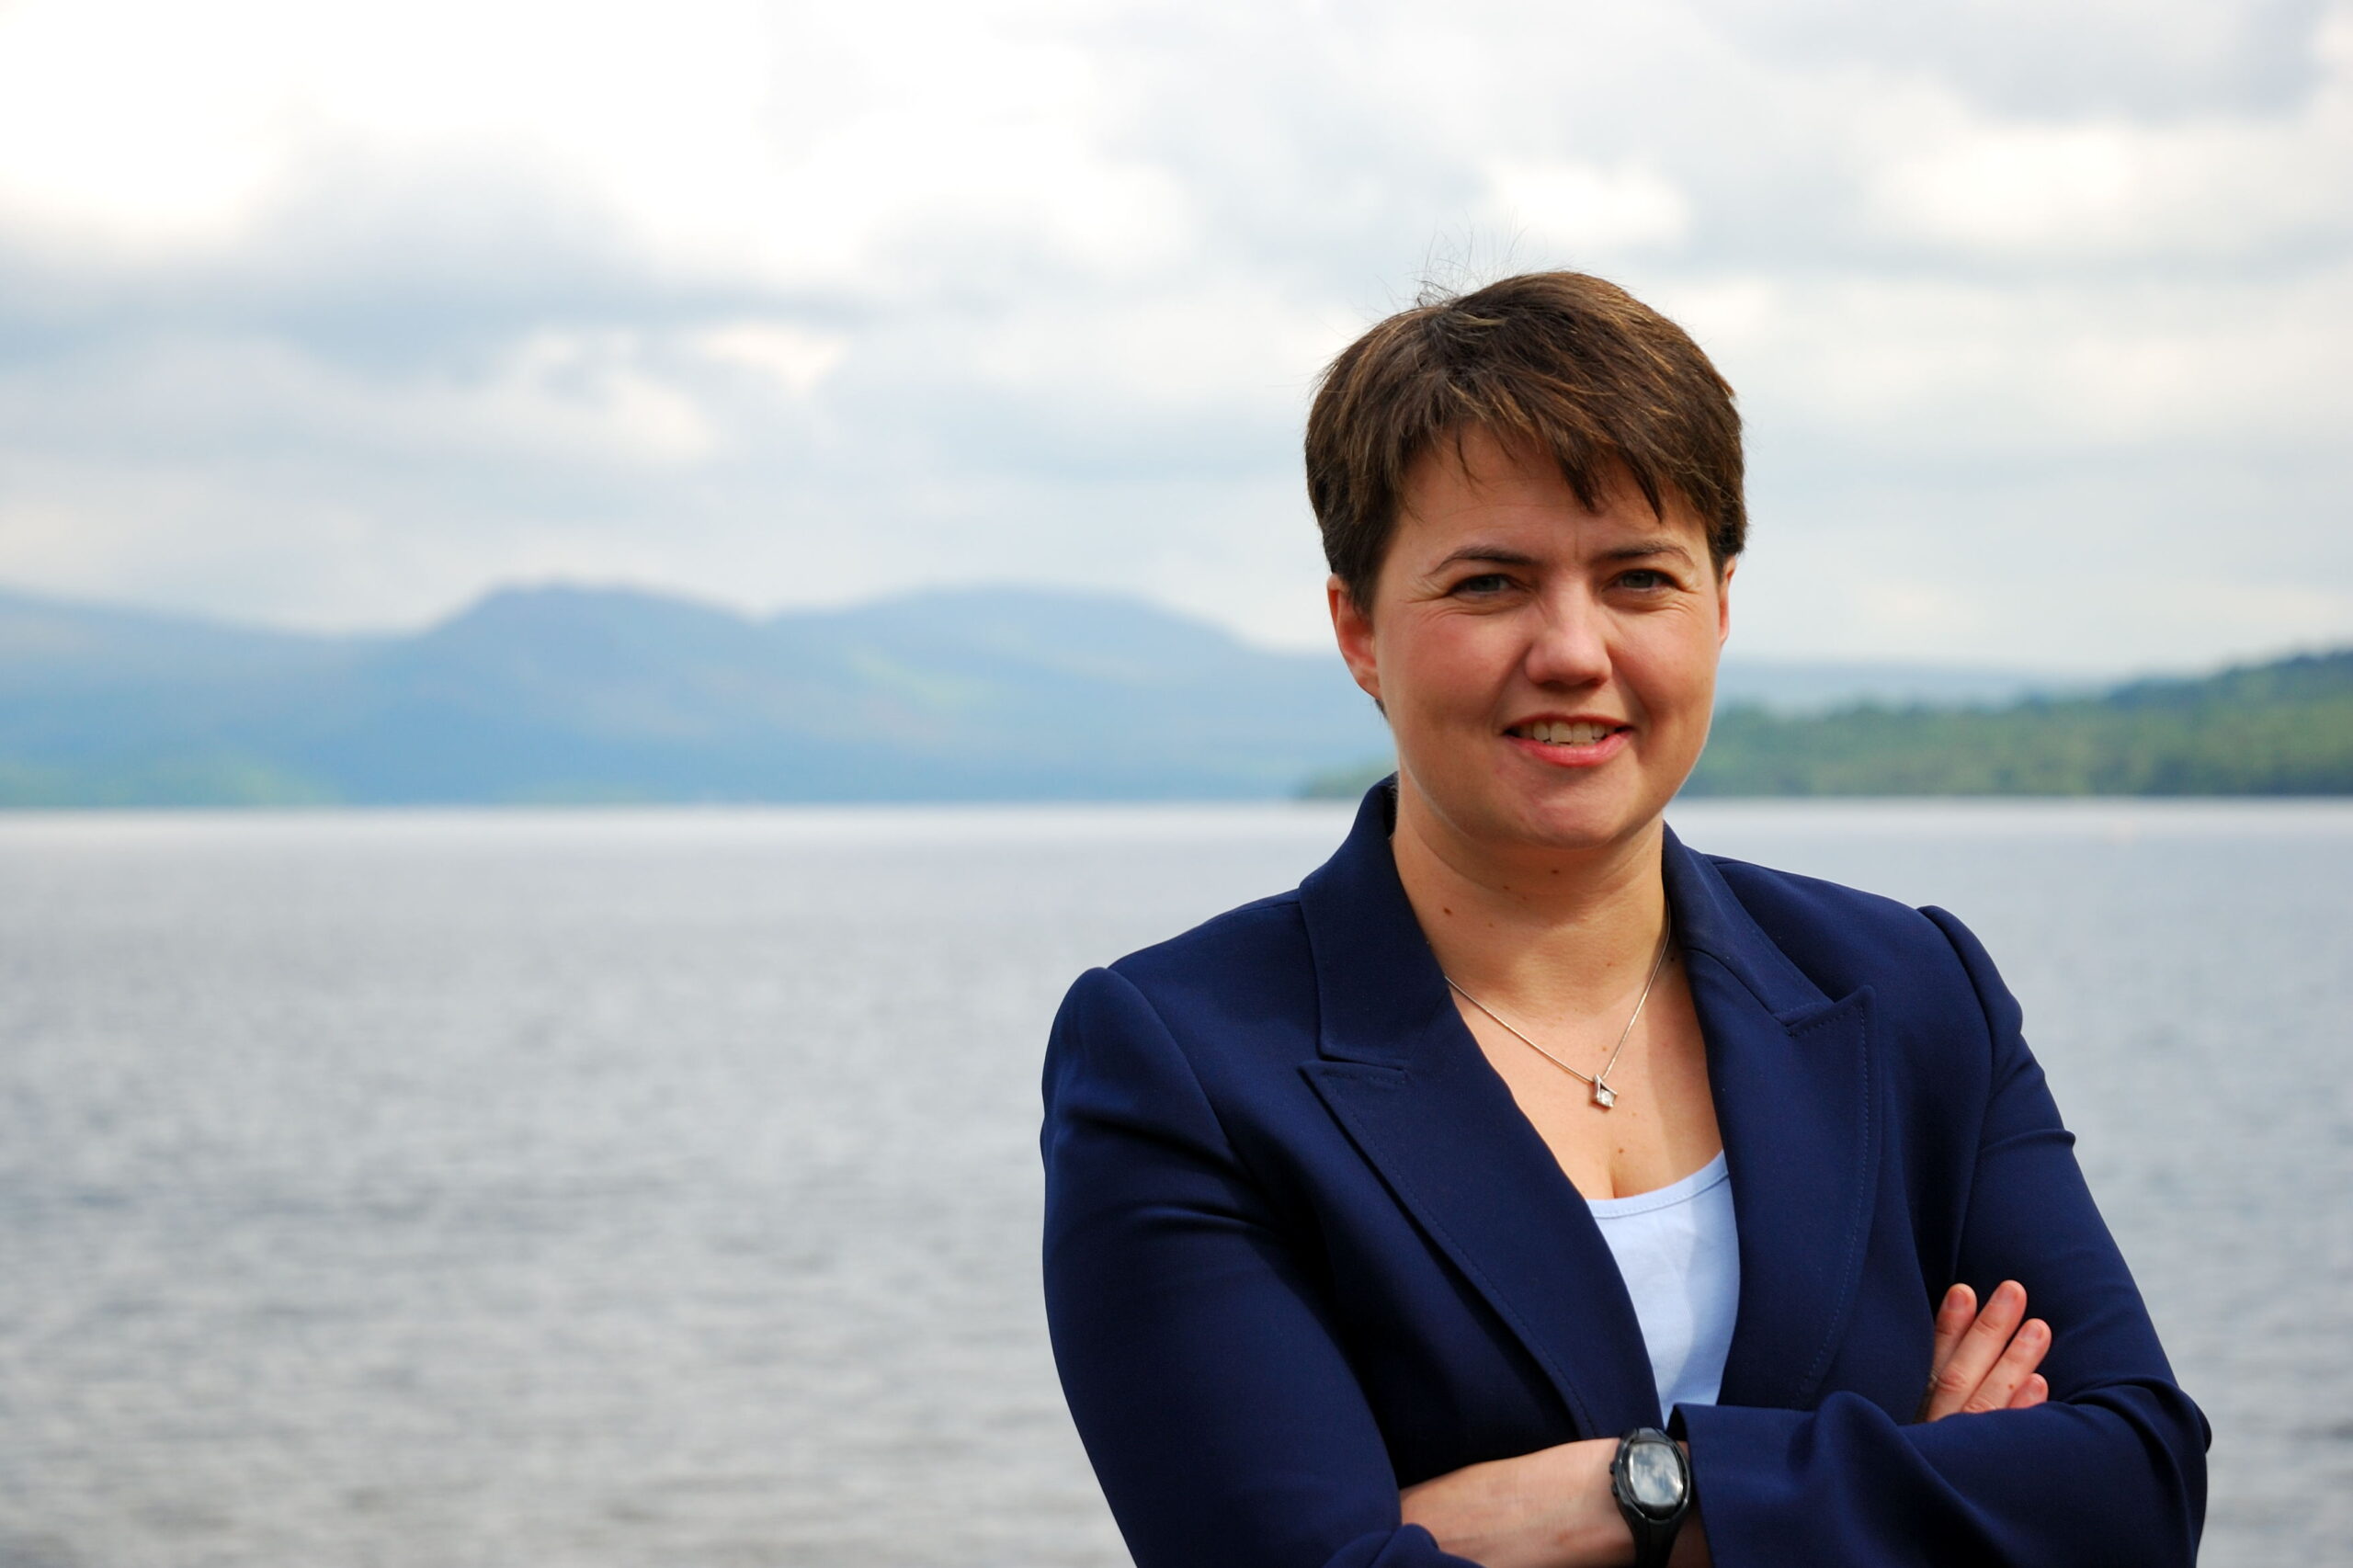 Ruth Davidson joins Times Radio to host a weekly show